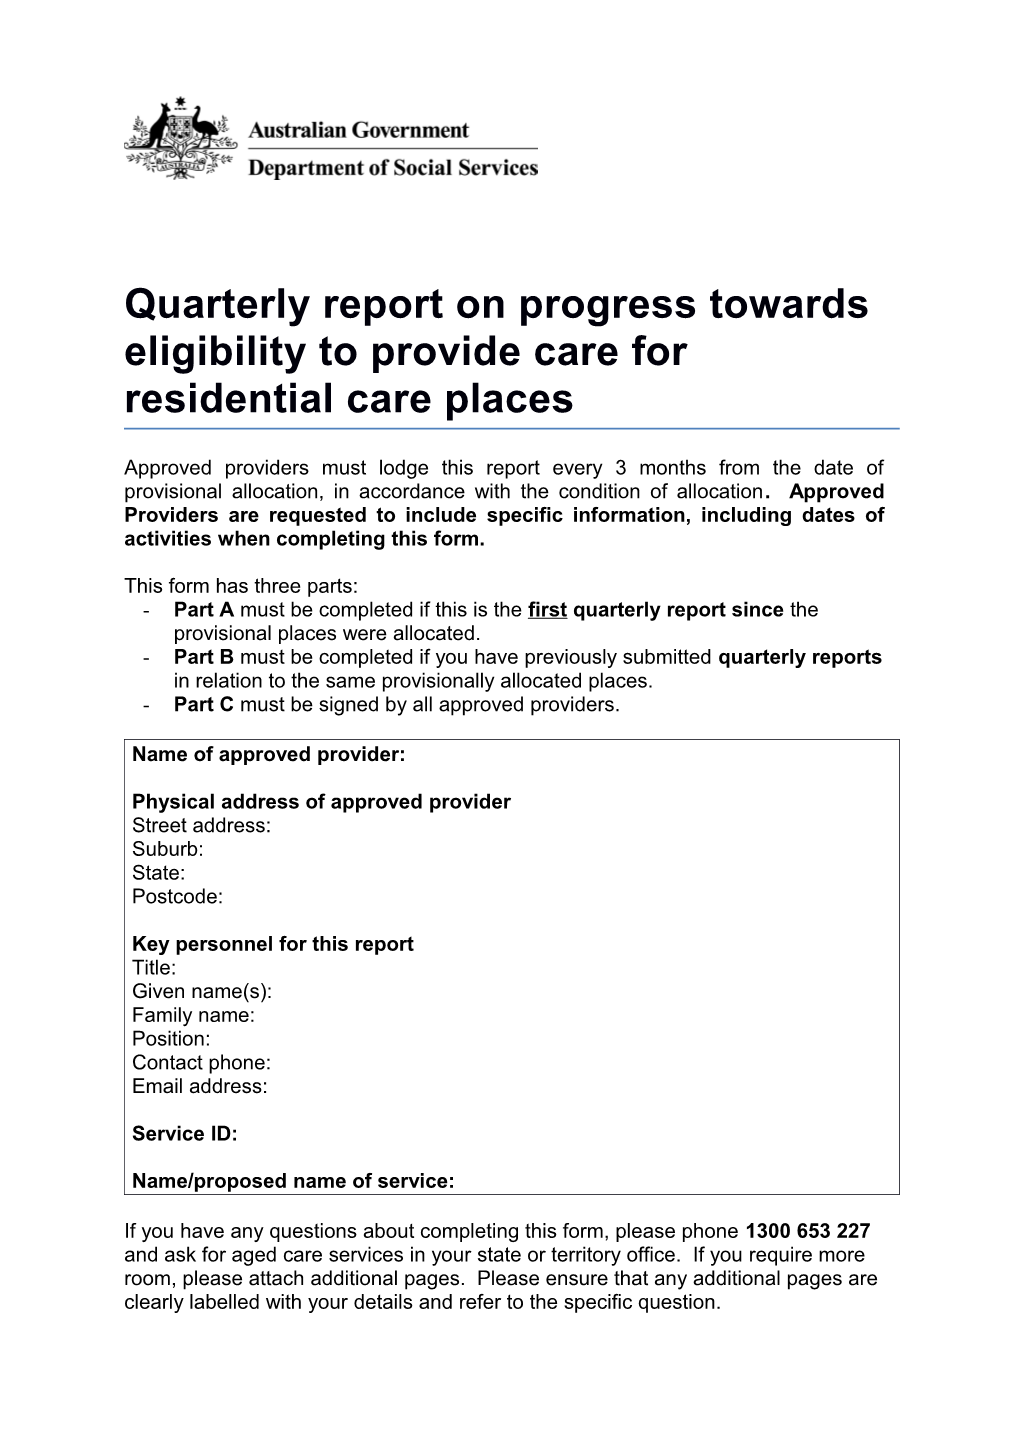 Quarterly Report on Progress Towards Eligibility to Provide Care for Residential Care Places